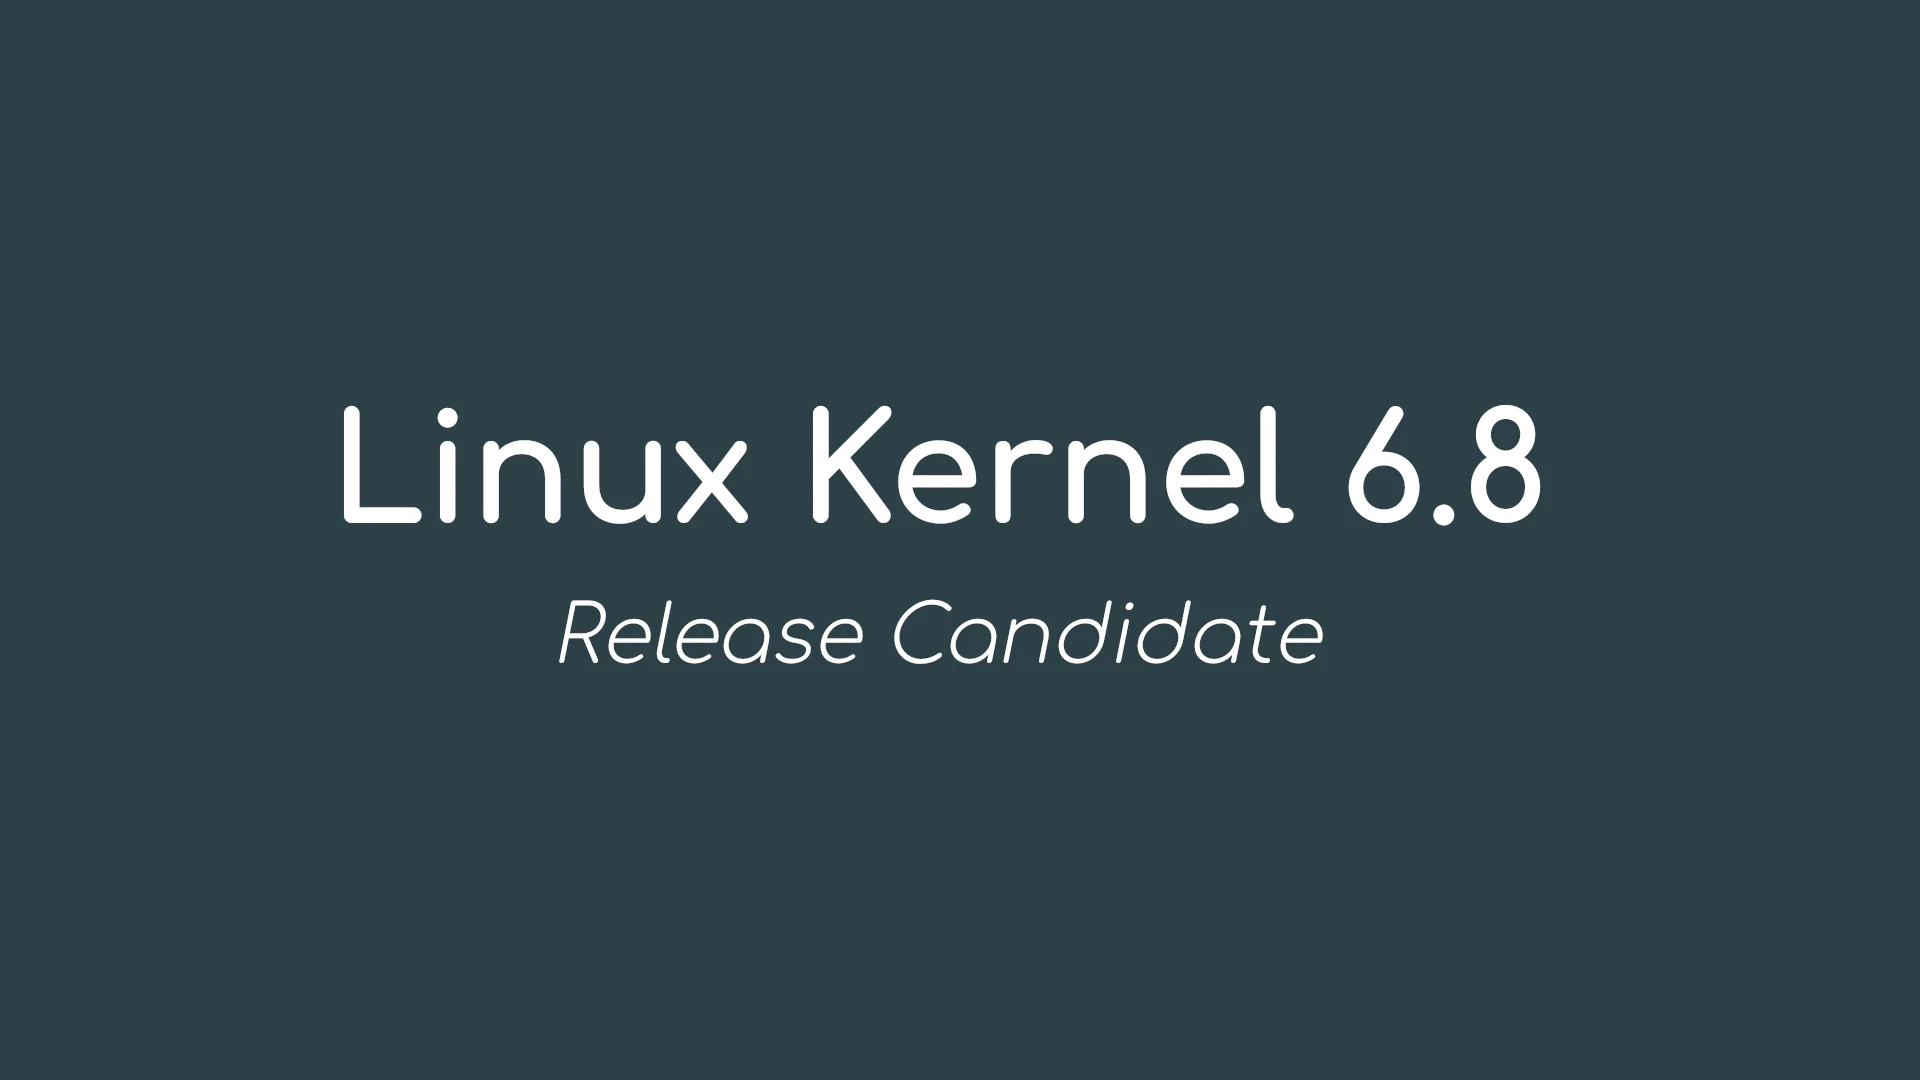 Linus Torvalds Announces the First Linux Kernel 6.8 Release Candidate